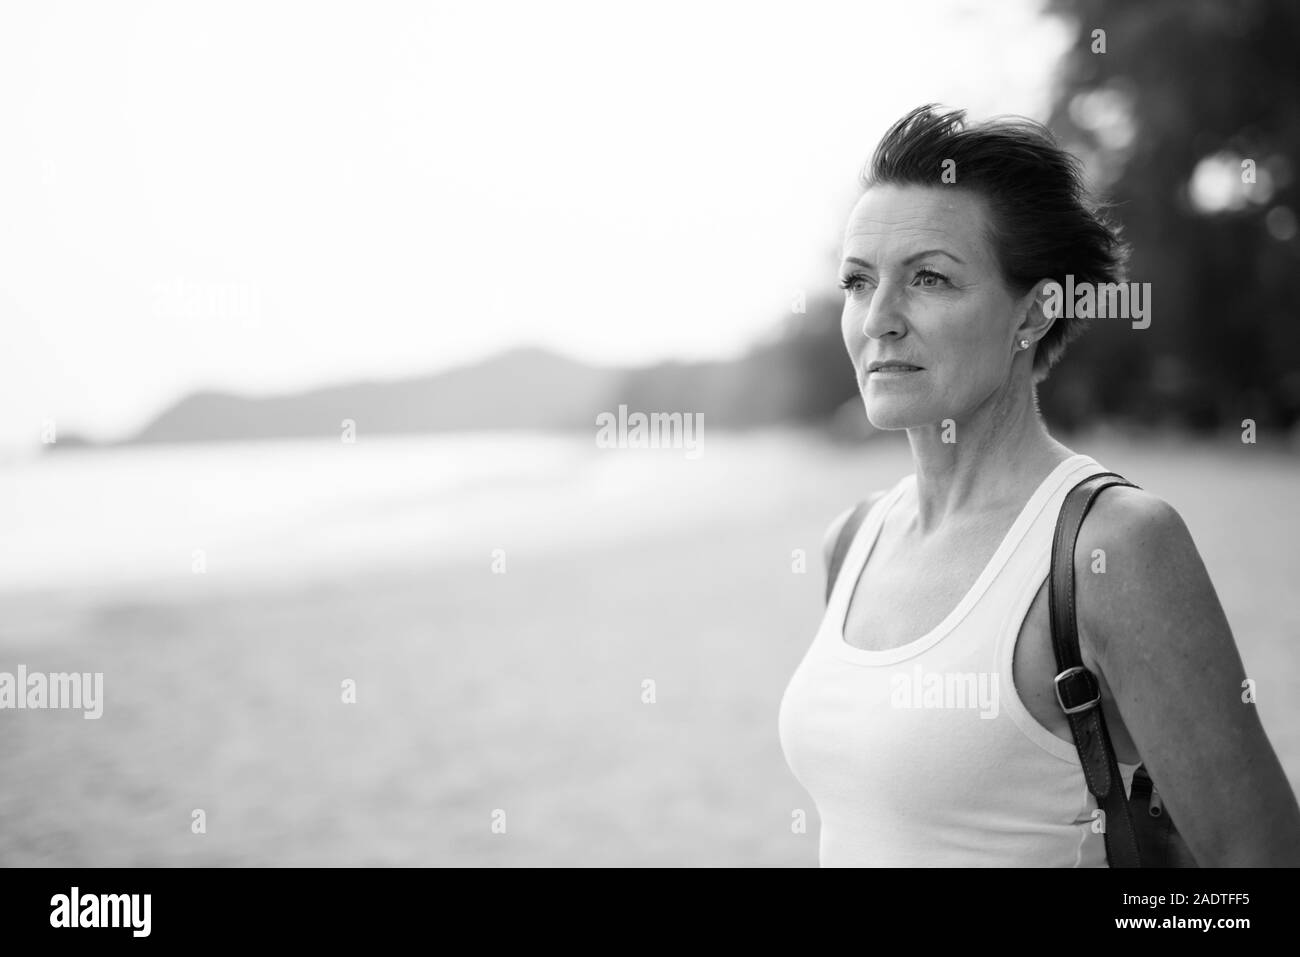 Woman lady vacation Black and White Stock Photos & Images - Alamy